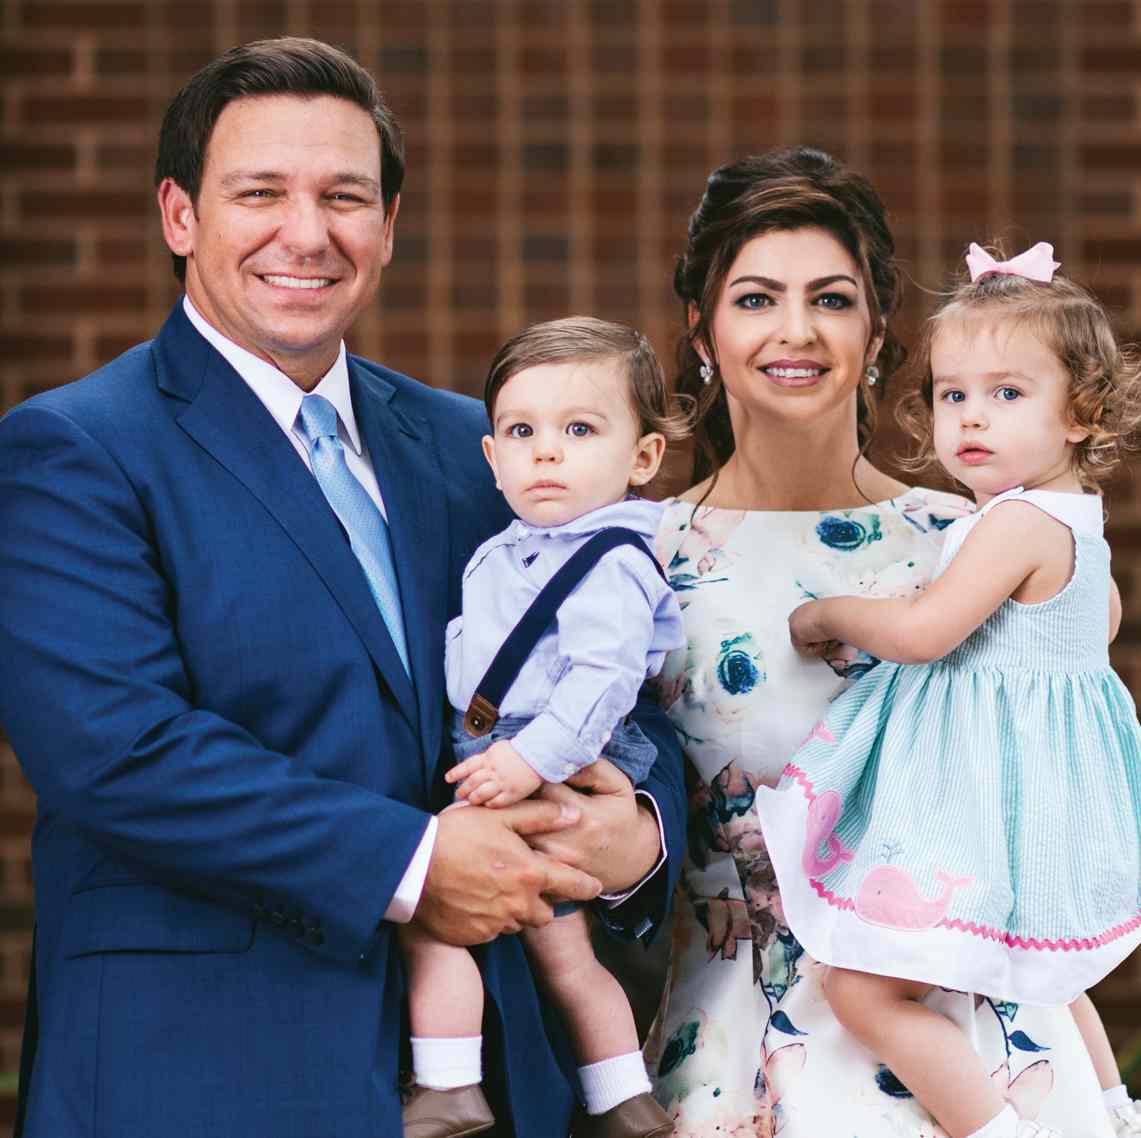 Image of a prominent government official, Casey DeSantis with her husband and kids